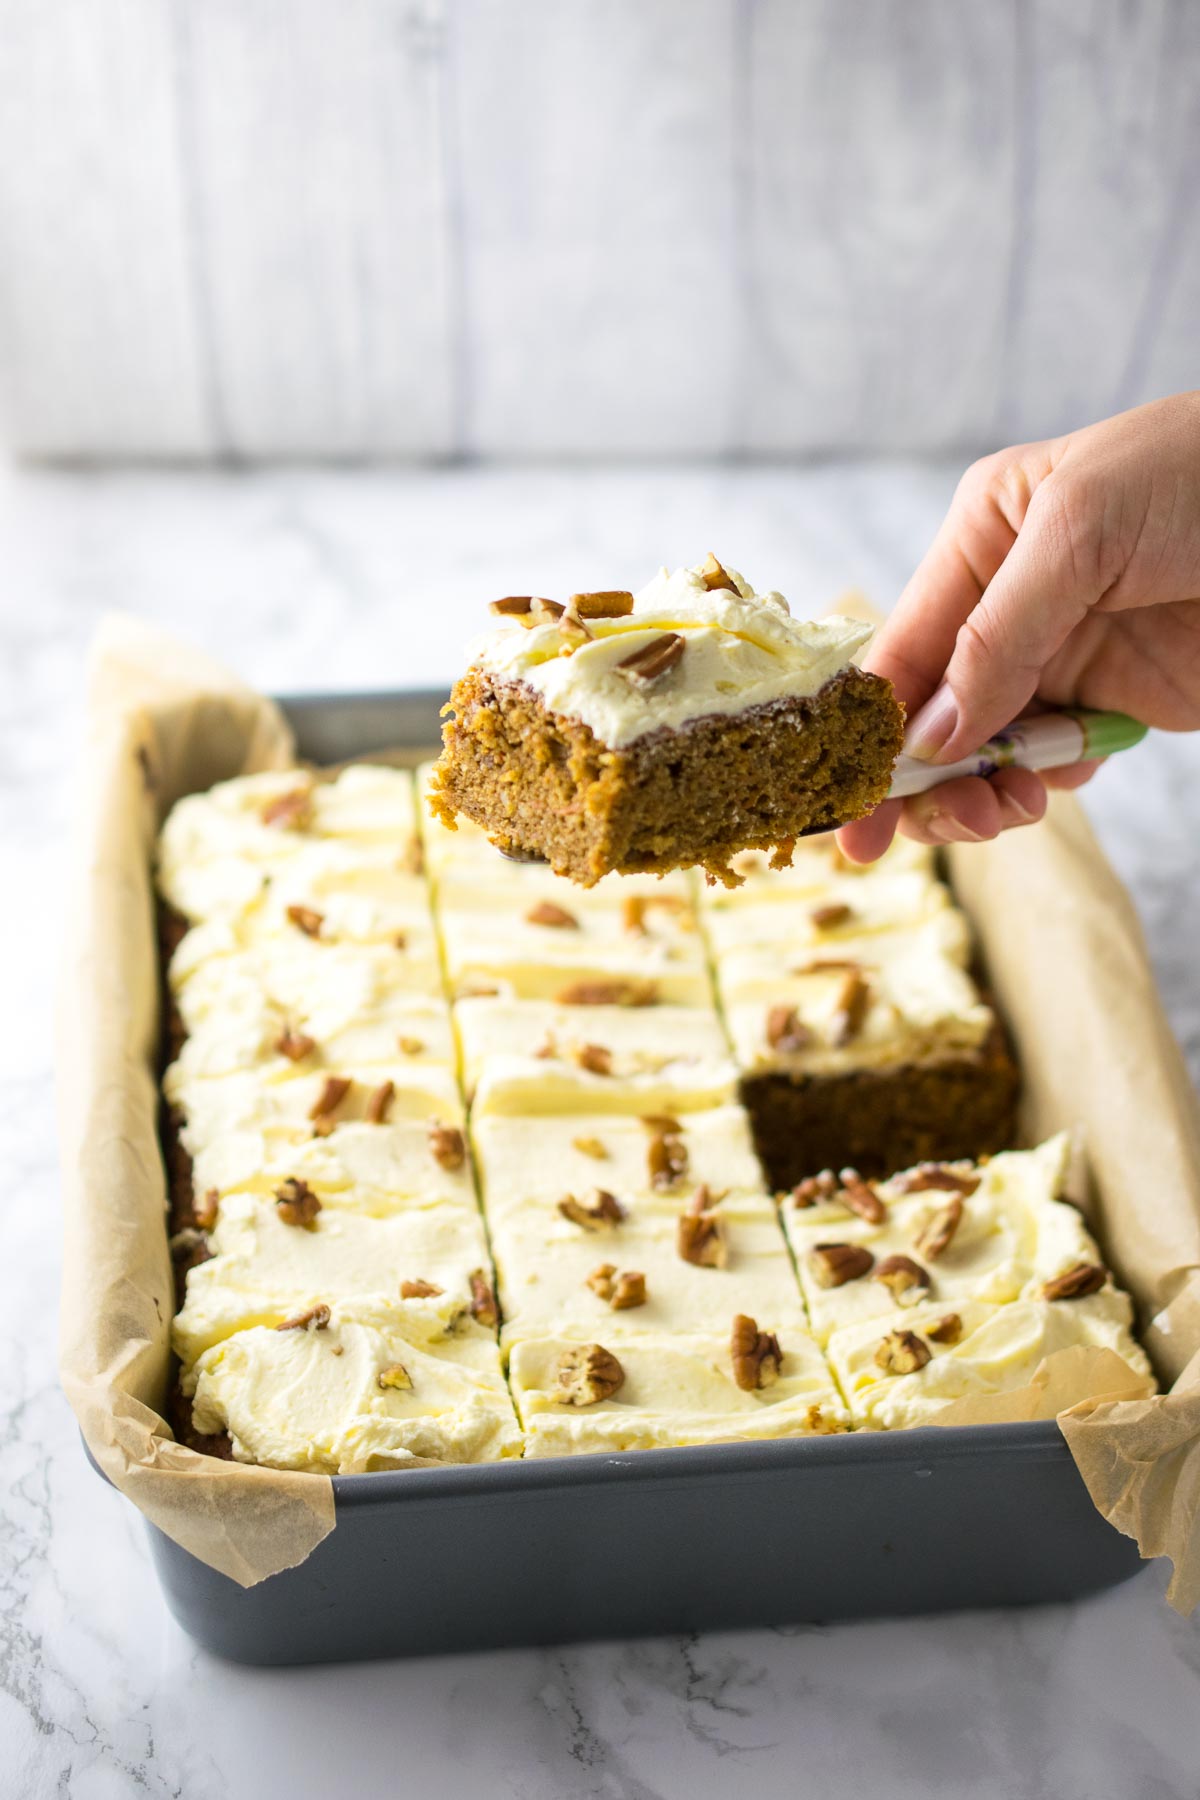 Deliciously moist and flavourful carrot cake so good, you won't miss the dairy or the gluten at all!